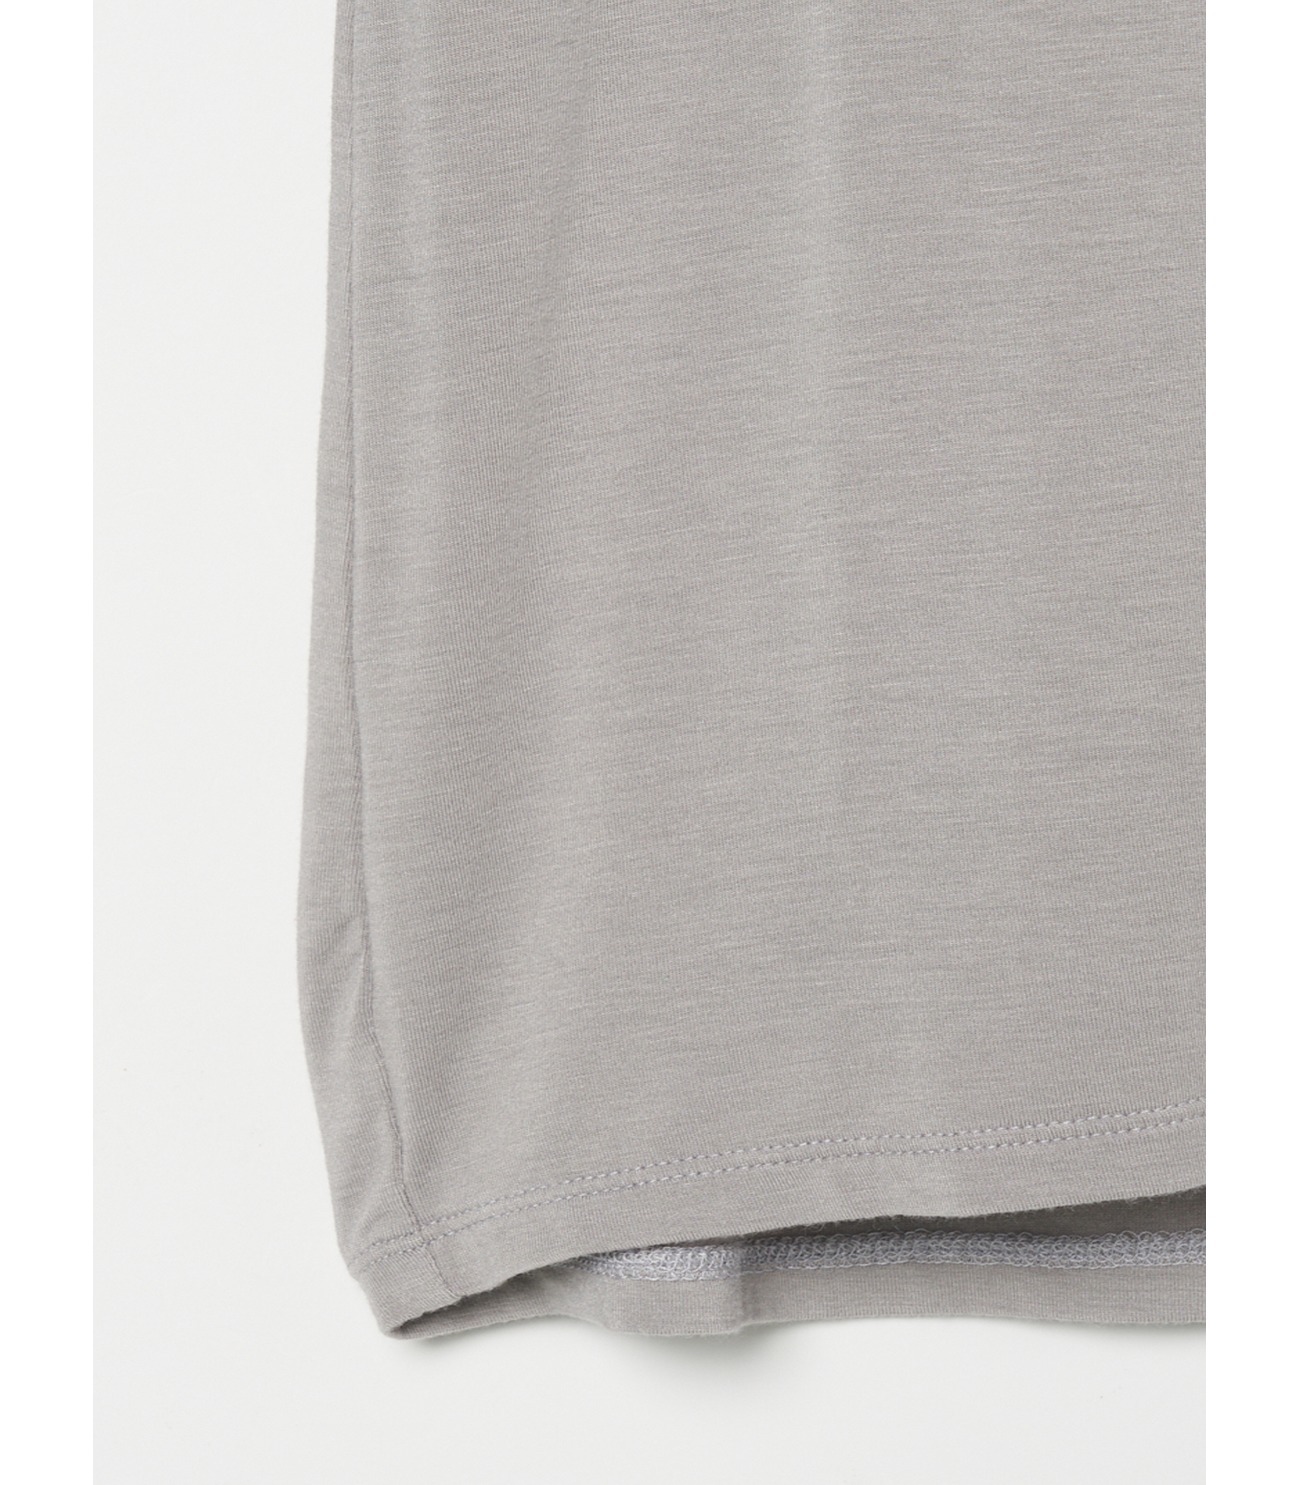 Outlast jersey double v neck tee 詳細画像 grey 4